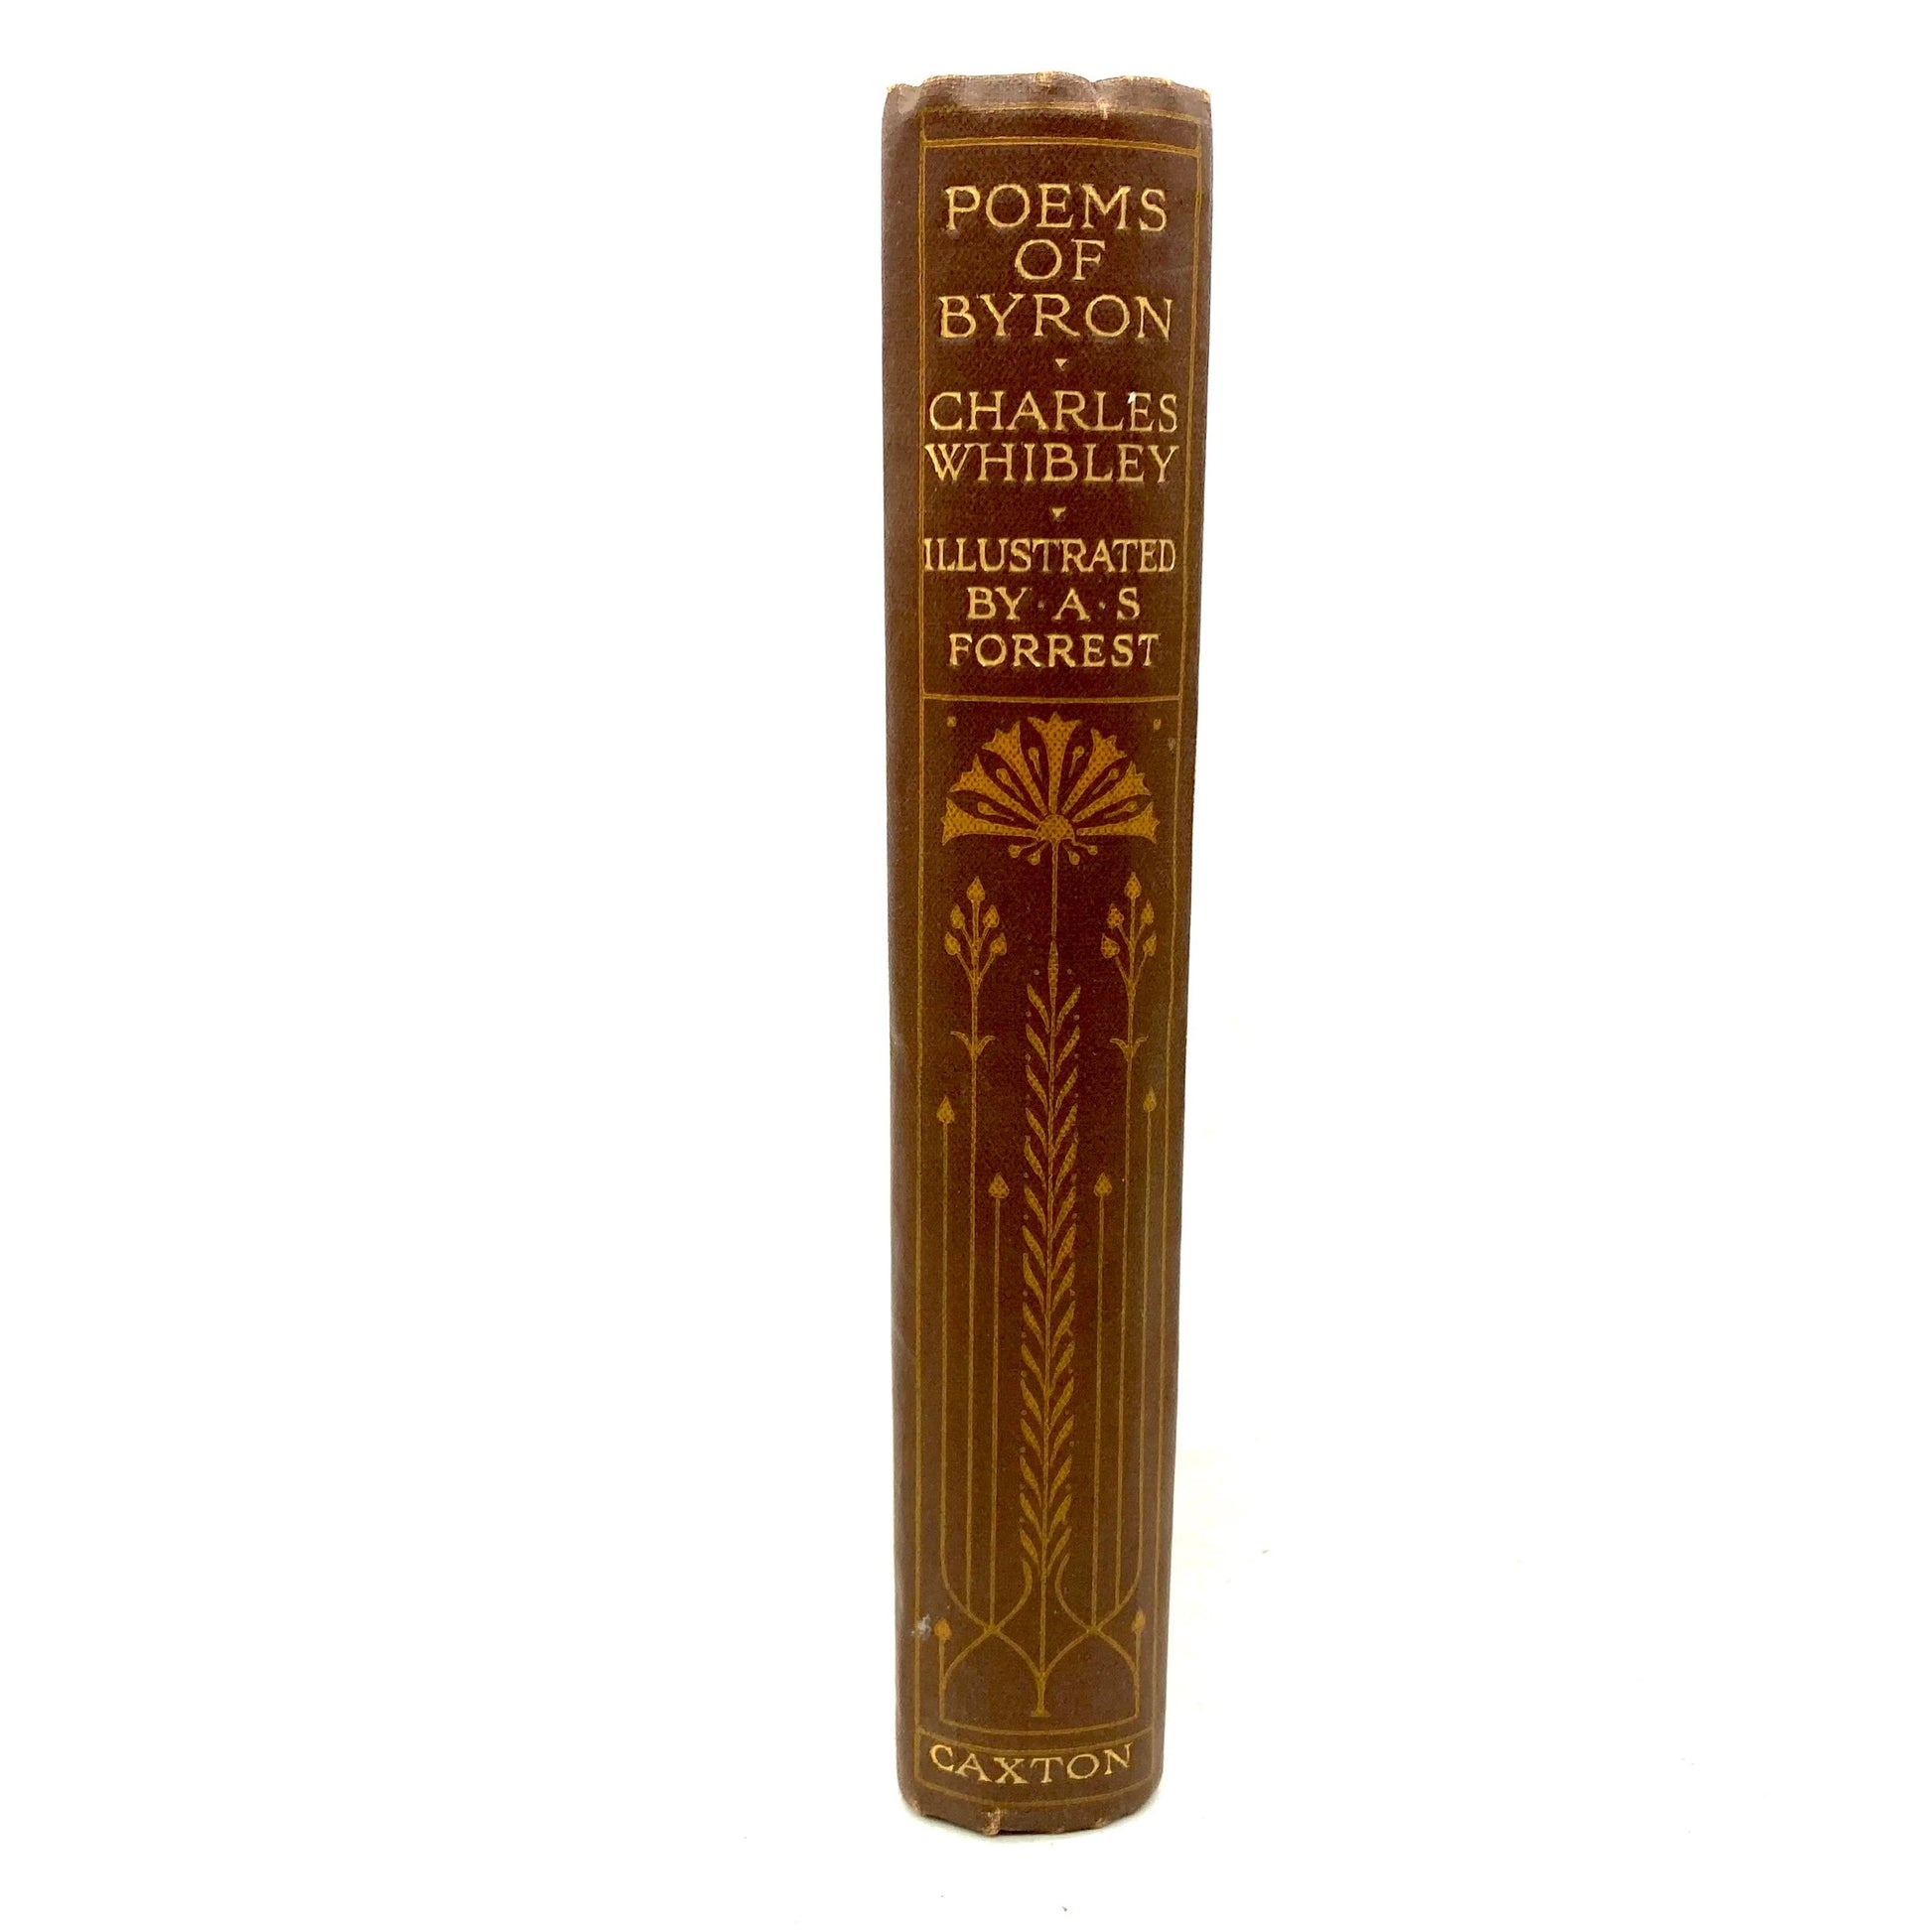 BYRON, Lord "Poems of Byron" Illustrated by A.S. Forrest [Caxton Publishing, c1906] - Buzz Bookstore